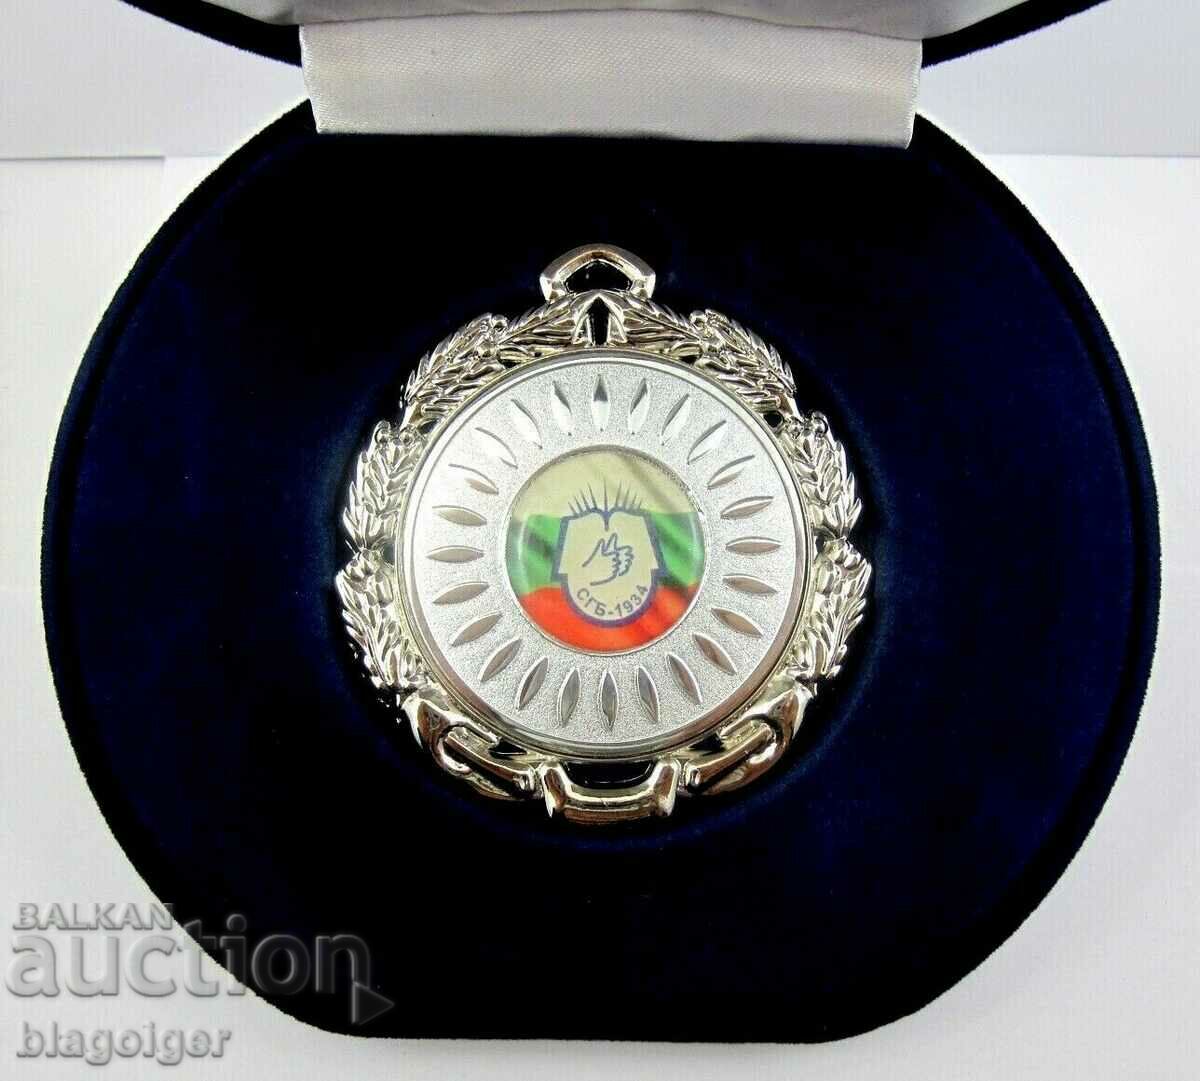 Rare medal - Union of the Deaf in Bulgaria - Prize medal